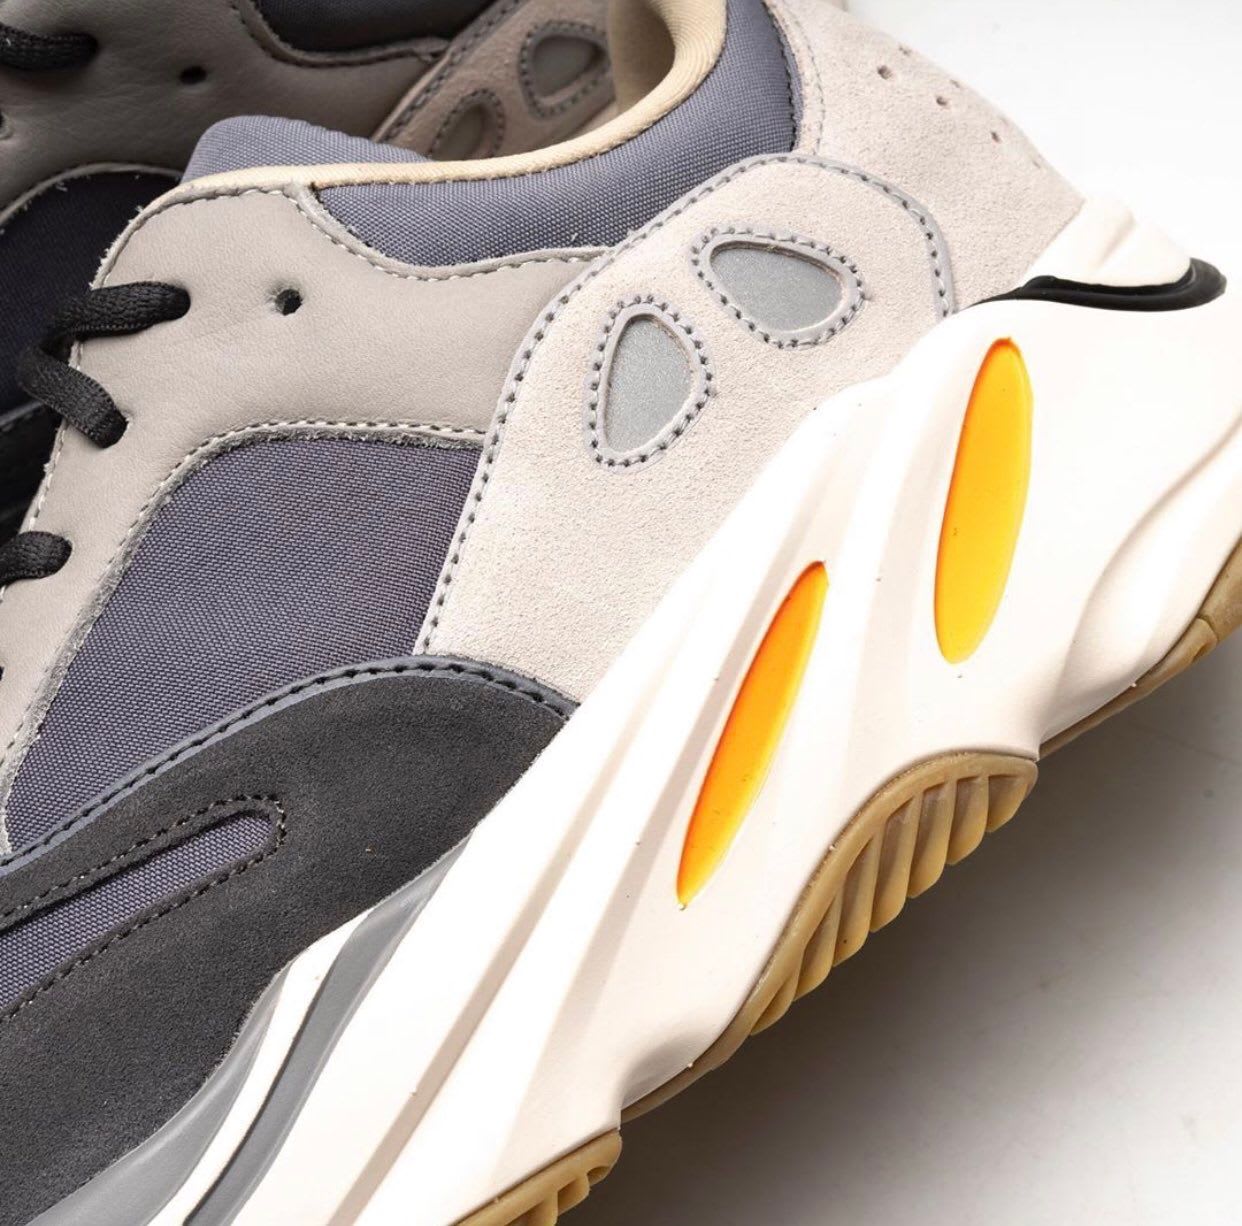 Magnet' Yeezy Boost 700 Release Date Delayed | Complex